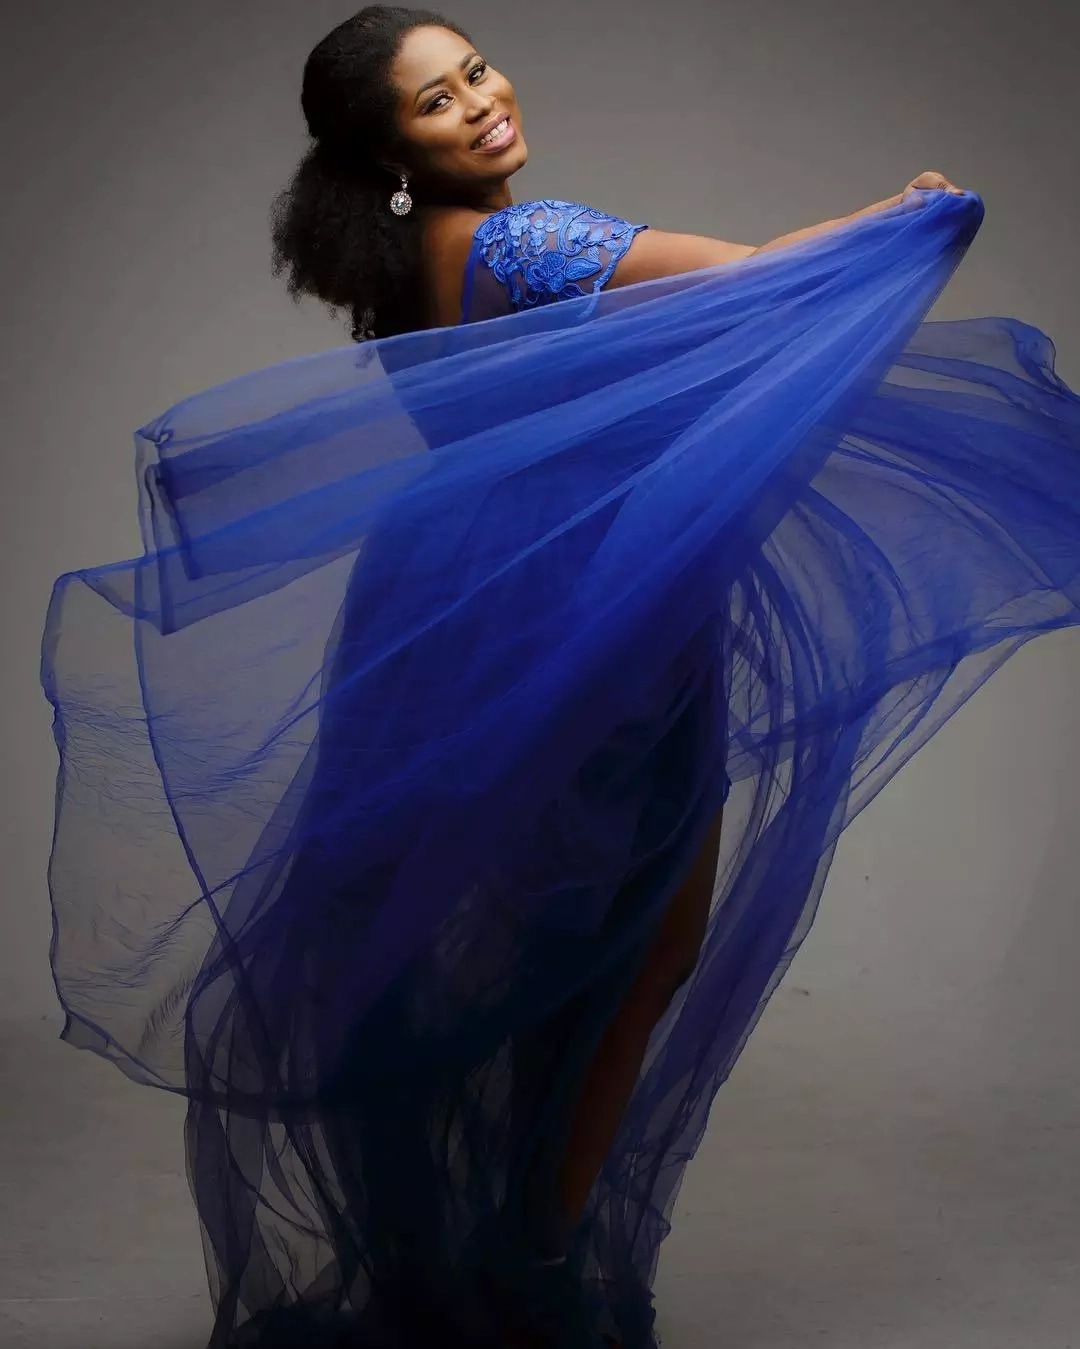 Christabel Ekeh's birthday suit photos for an advocacy prject